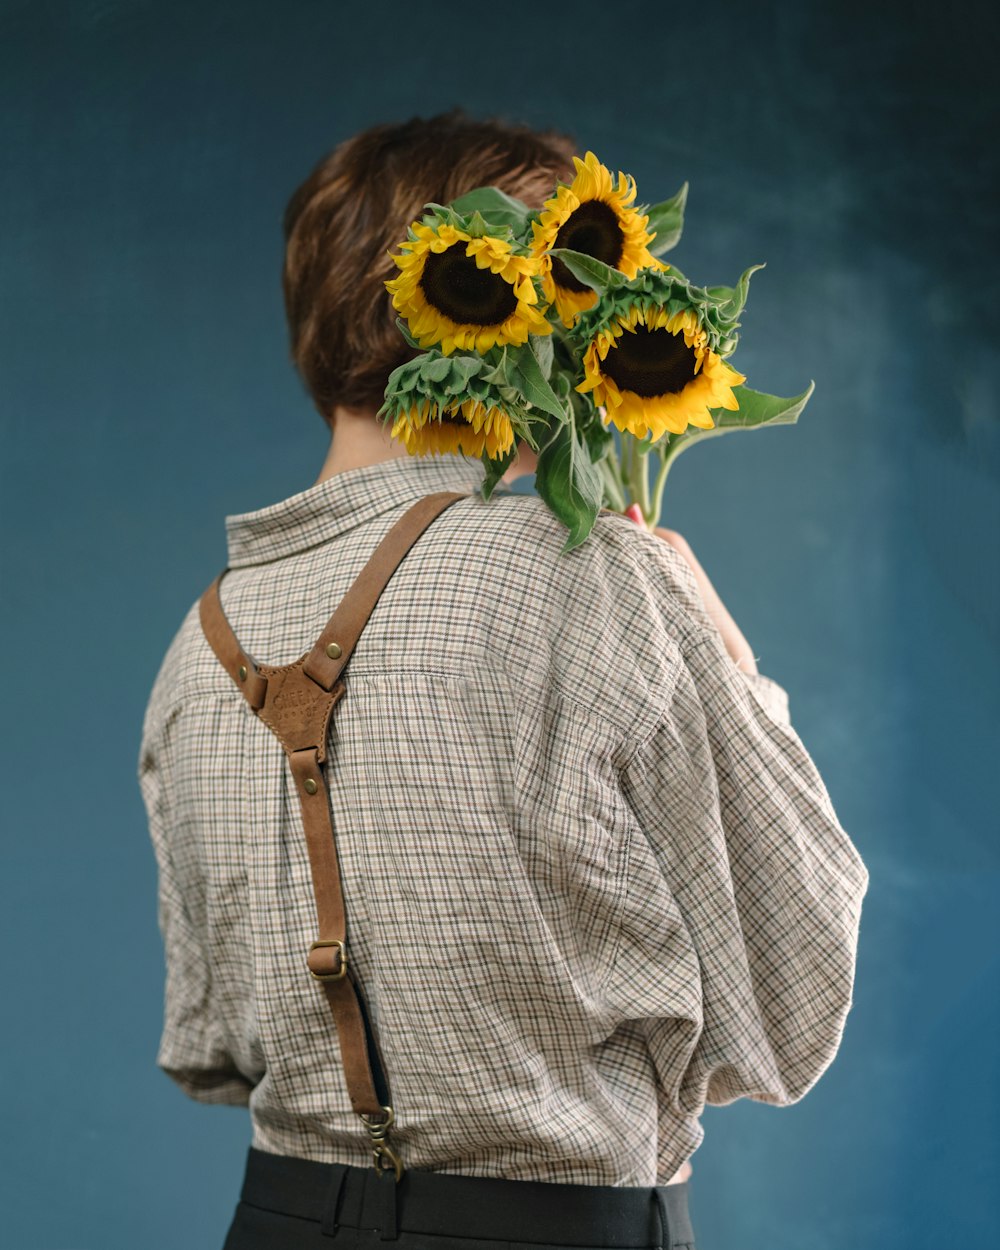 unknown person carrying three yellow sunflowers